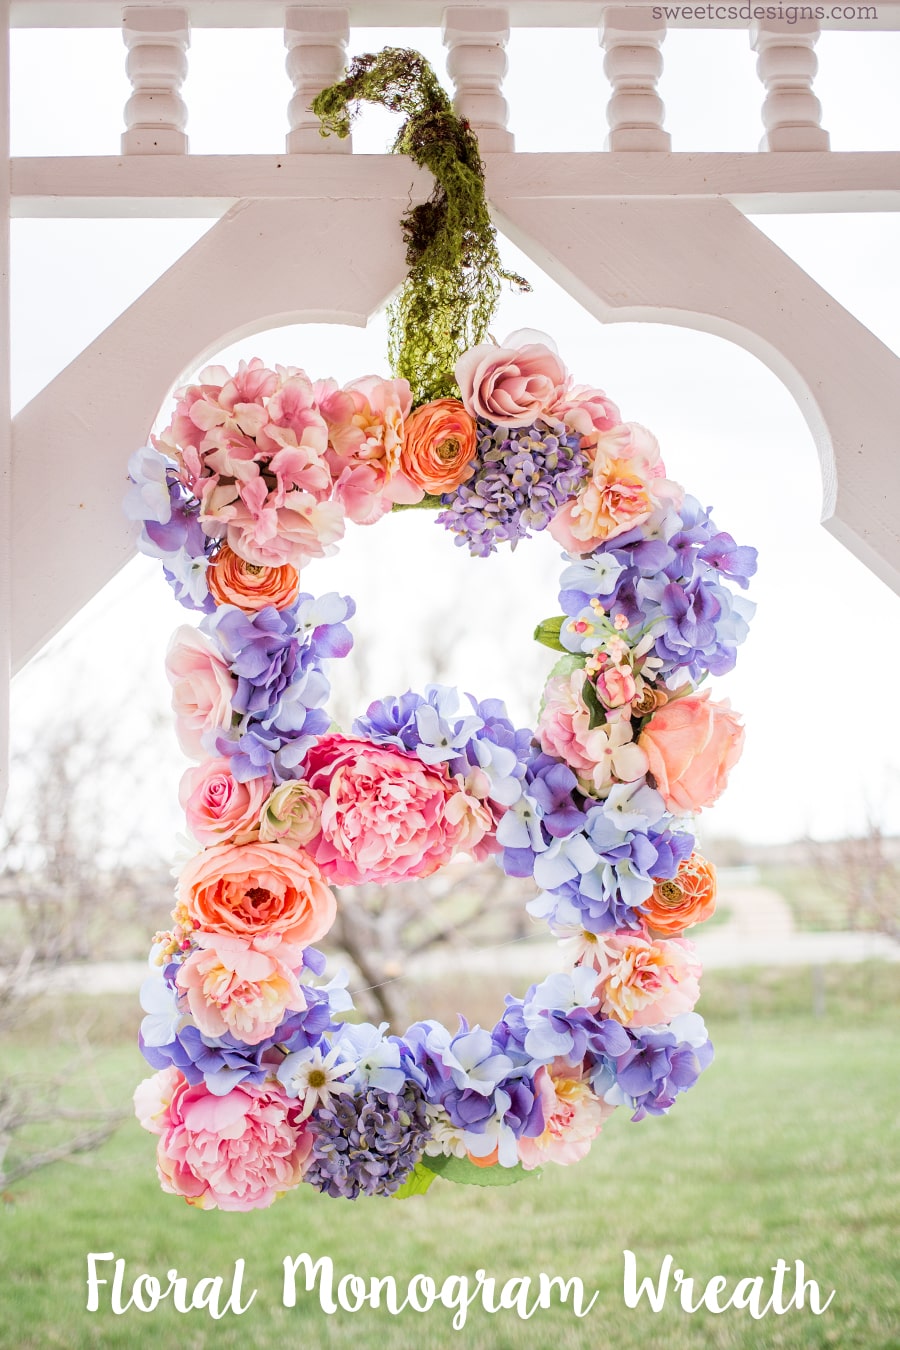 Floral monogram wreath- this is so cute and easy to make!